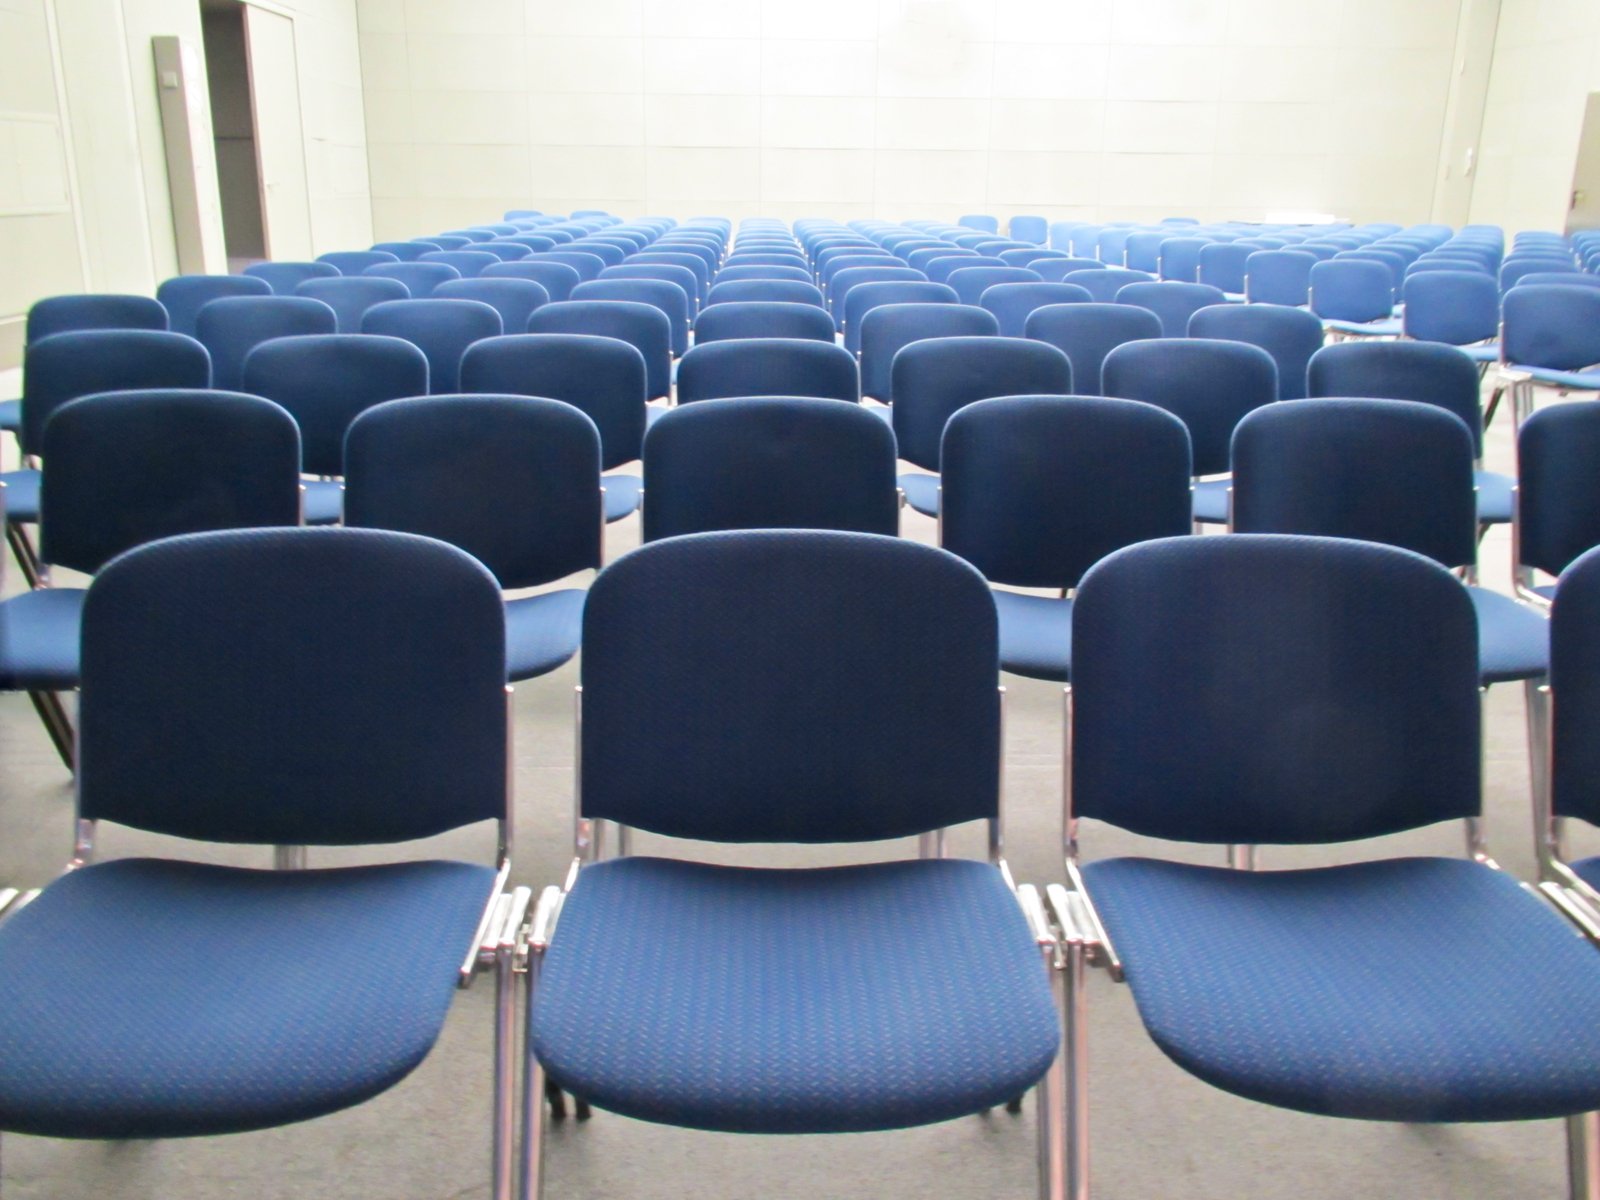 rows of blue chairs with rows of white ones